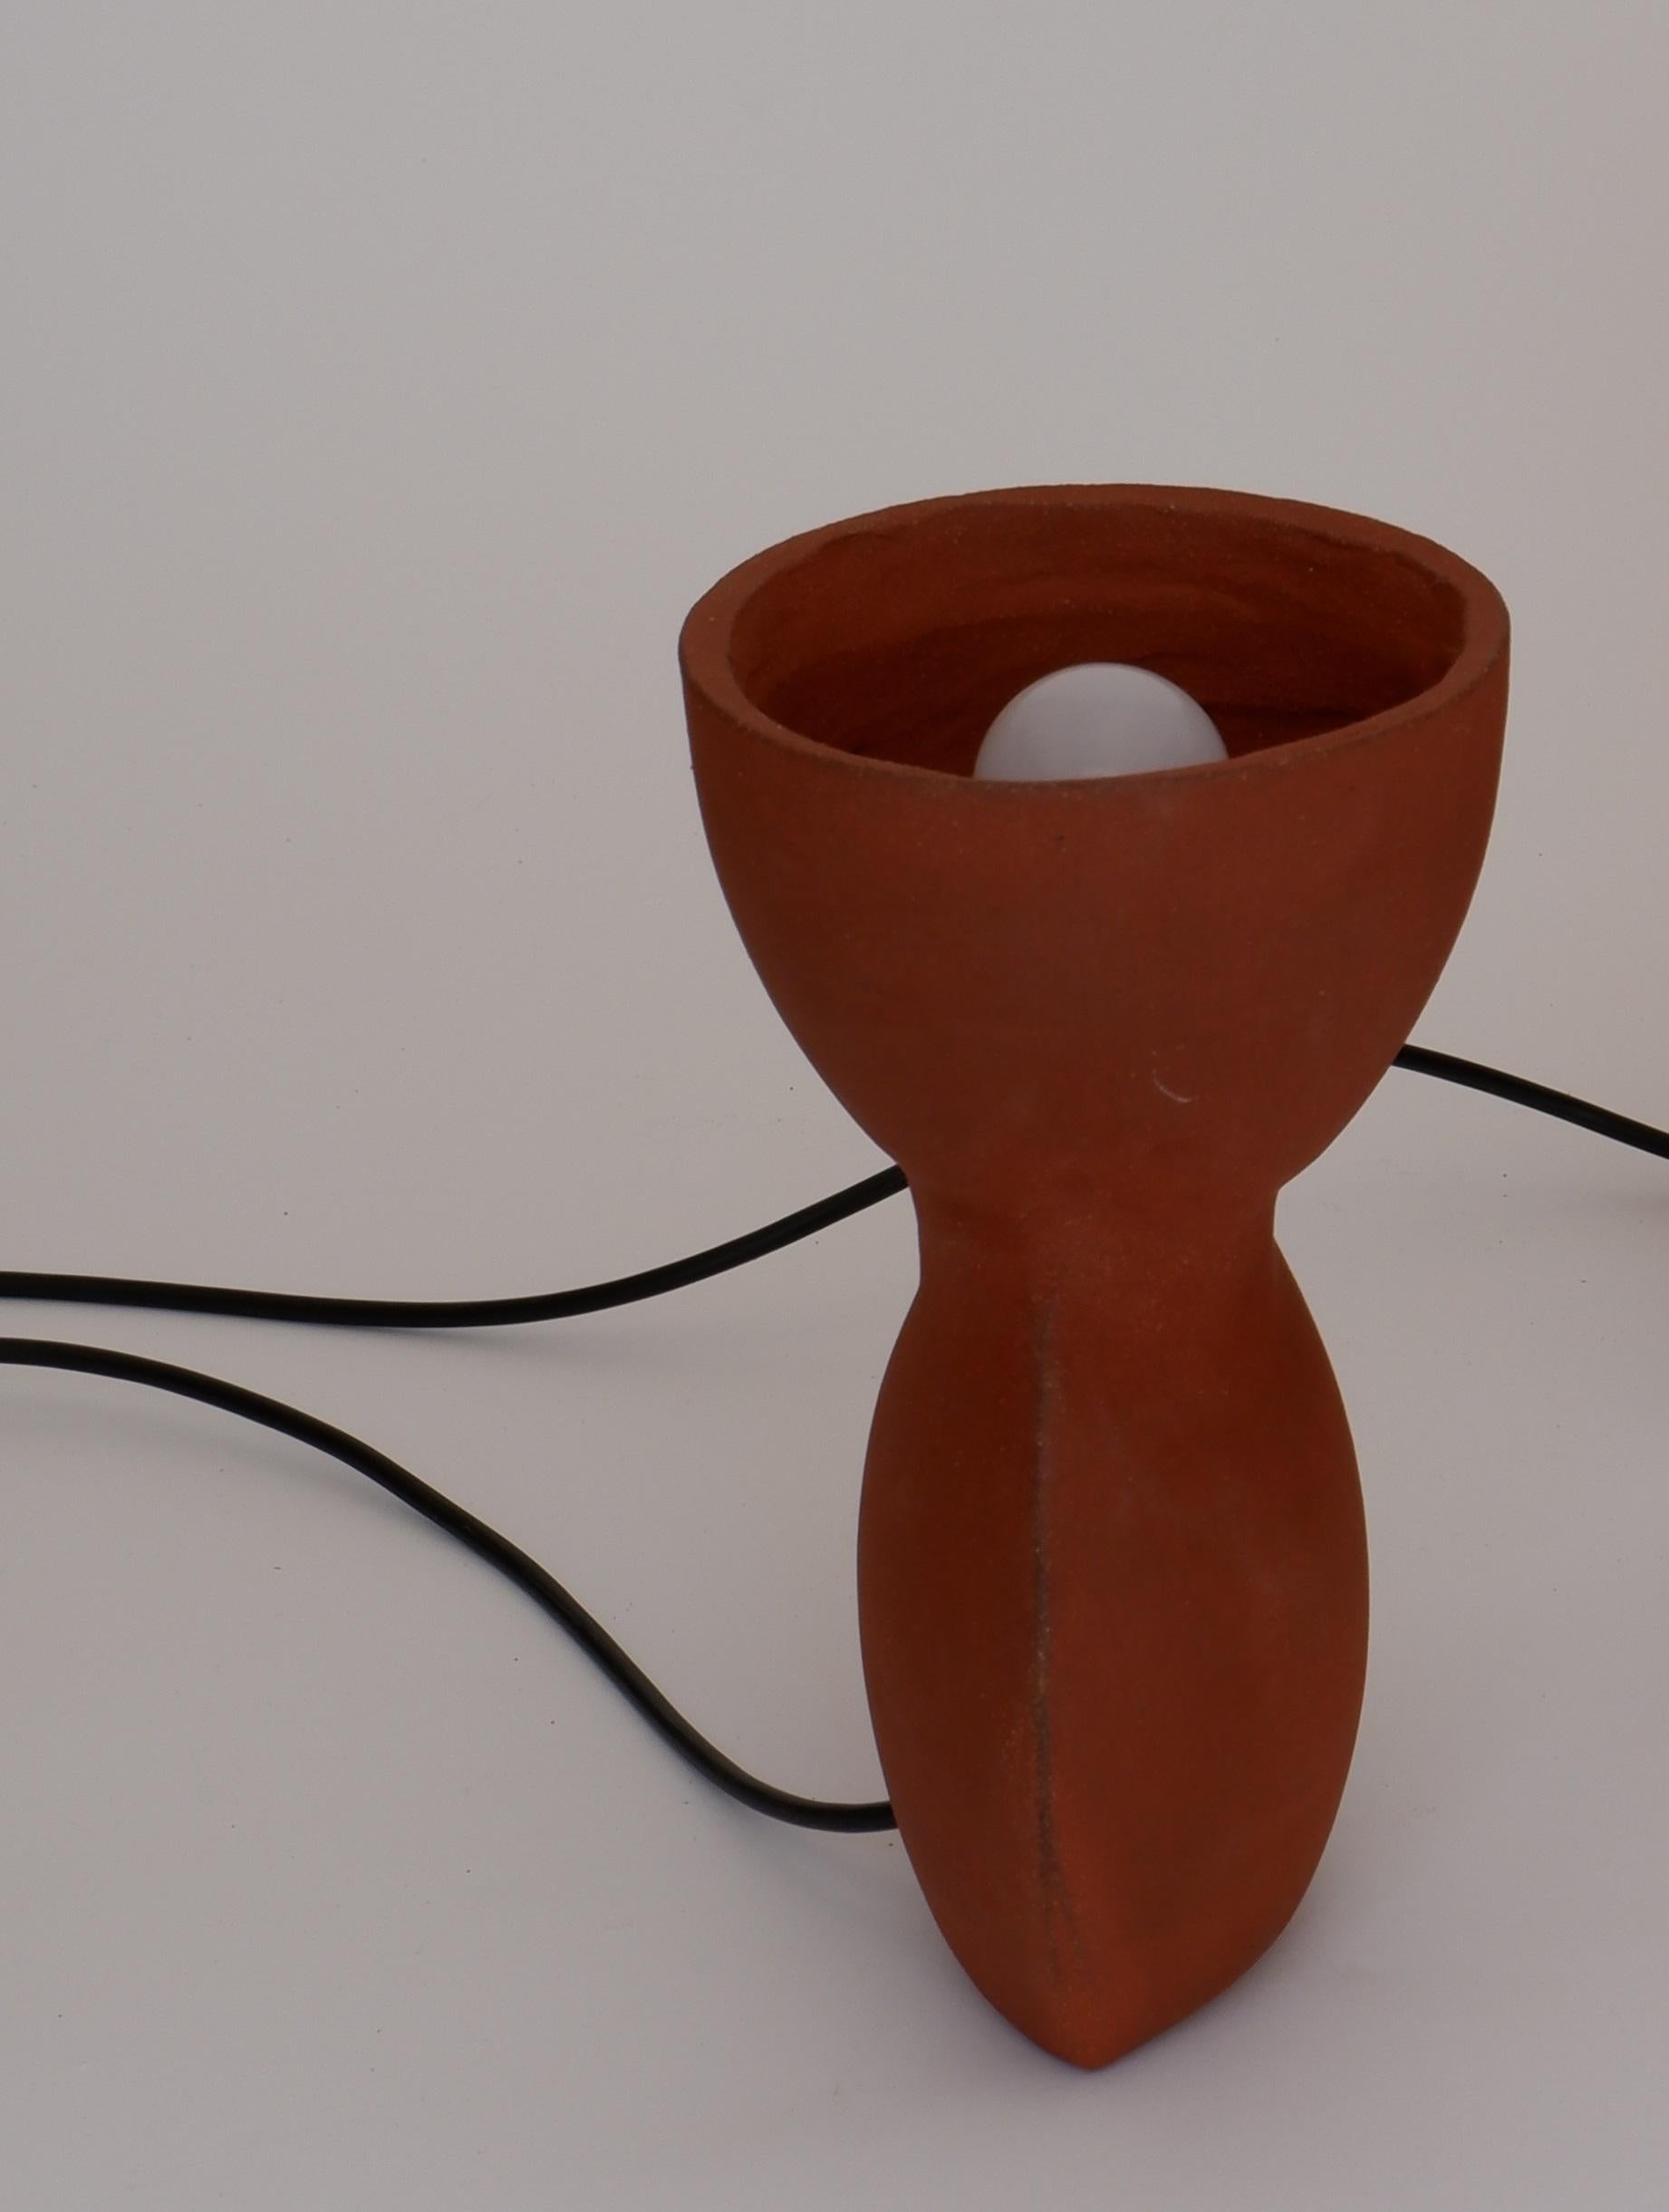 Unira Small Red Lamp by Ia Kutateladze
One Of A Kind.
Dimensions: D 14 x W 18 x H 25 cm.
Materials: Clay.

Each piece is one of a kind, due to its free hand-building process. Different color variations available: raw black clay, raw white clay and